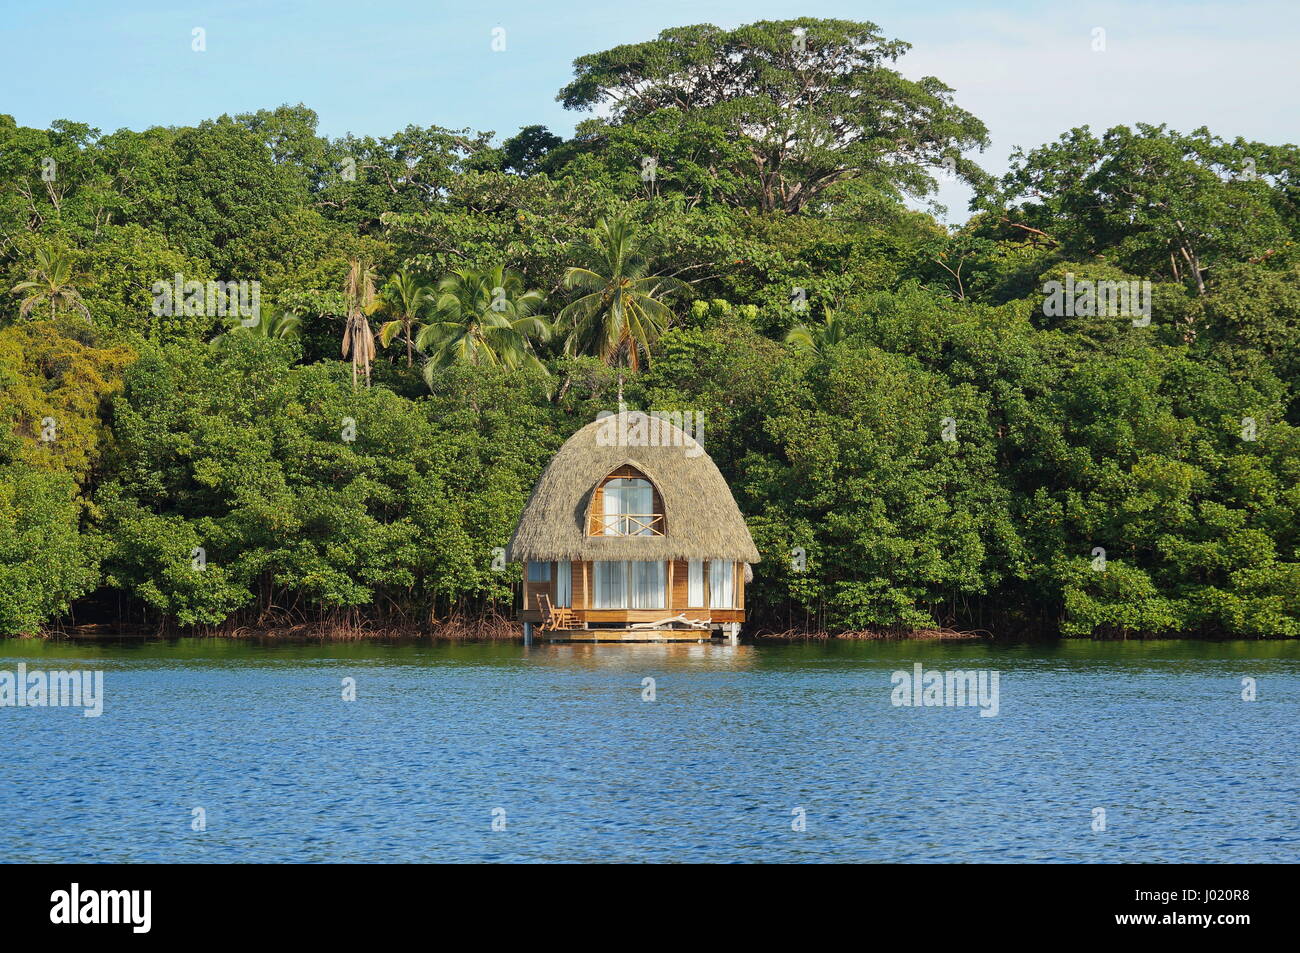 Tropical bungalow overwater with thatched palm roof and lush green vegetation on the sea shore, Bocas del Toro, Caribbean, Central America, Panama Stock Photo